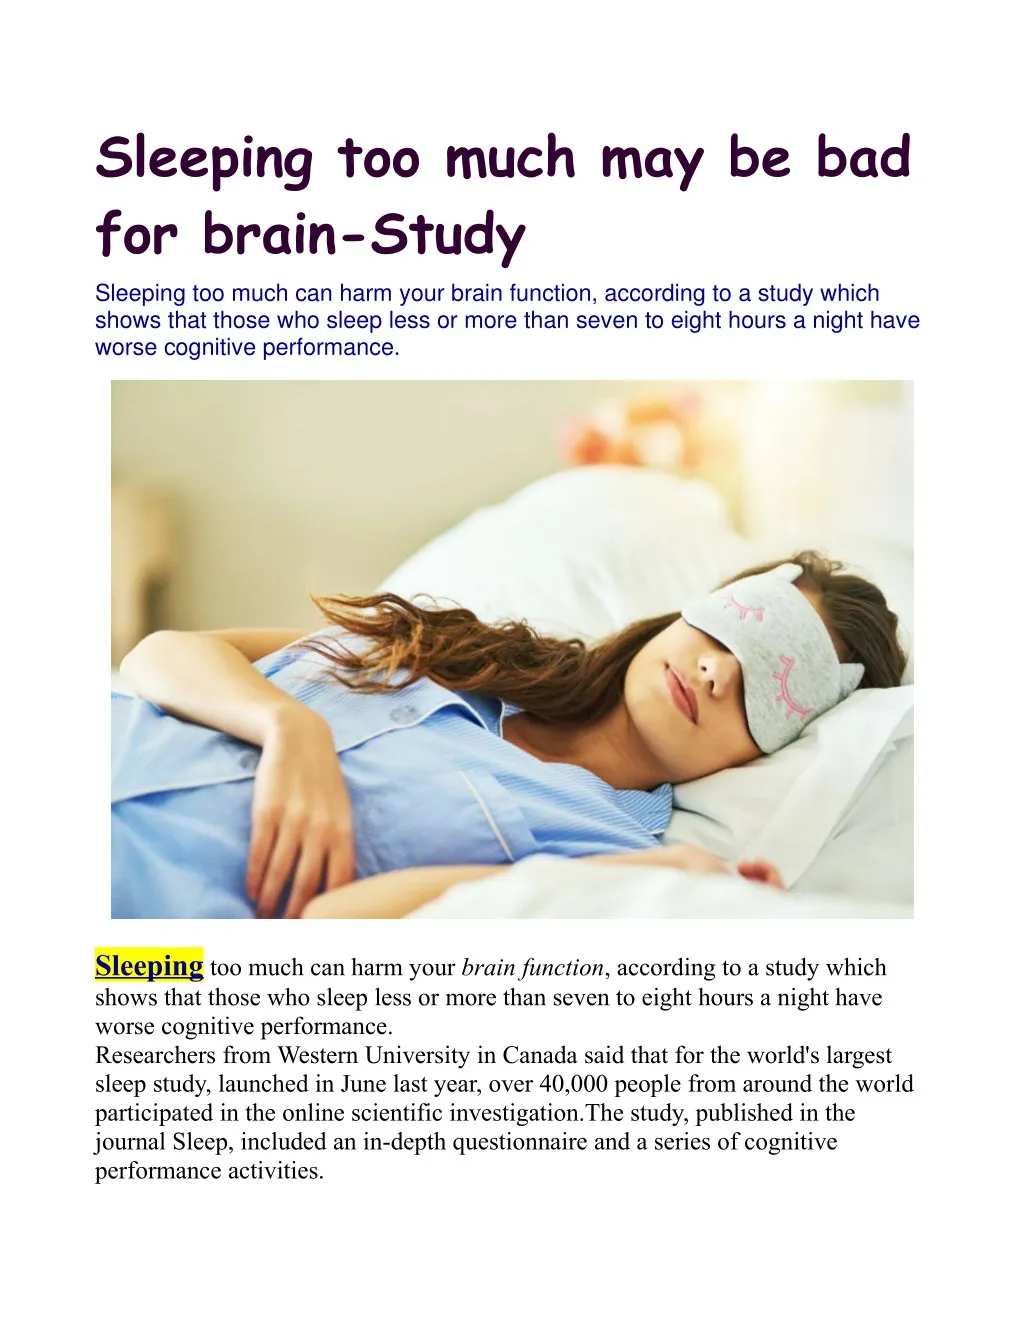 sleeping too much may be bad for brain study